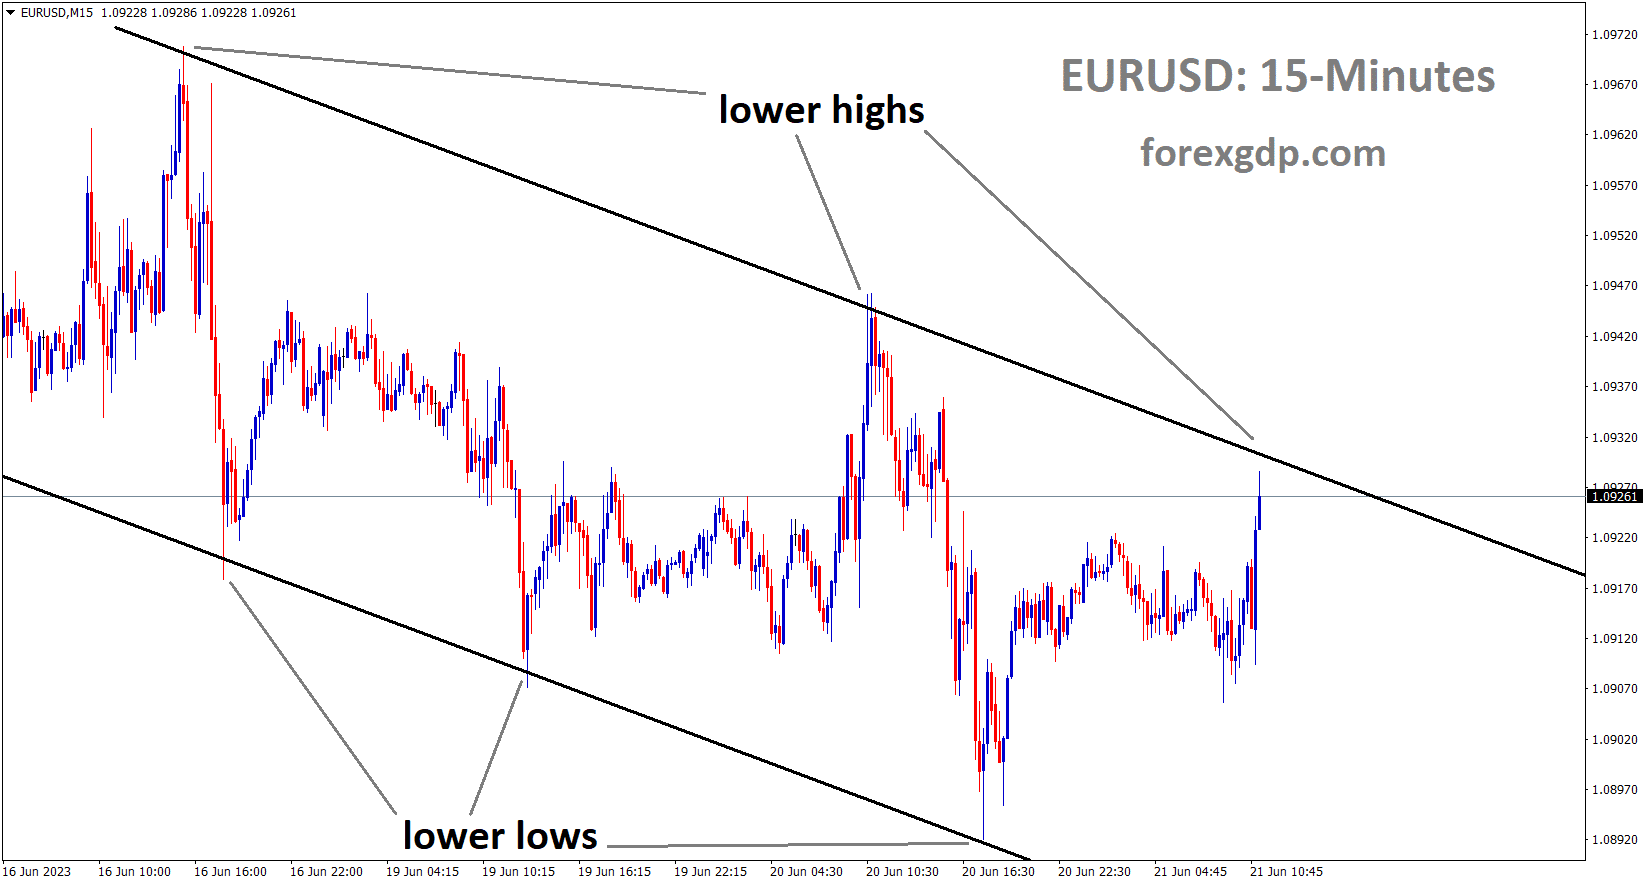 EURUSD is moving in the Descending channel and the market has reached the lower high area of the channel